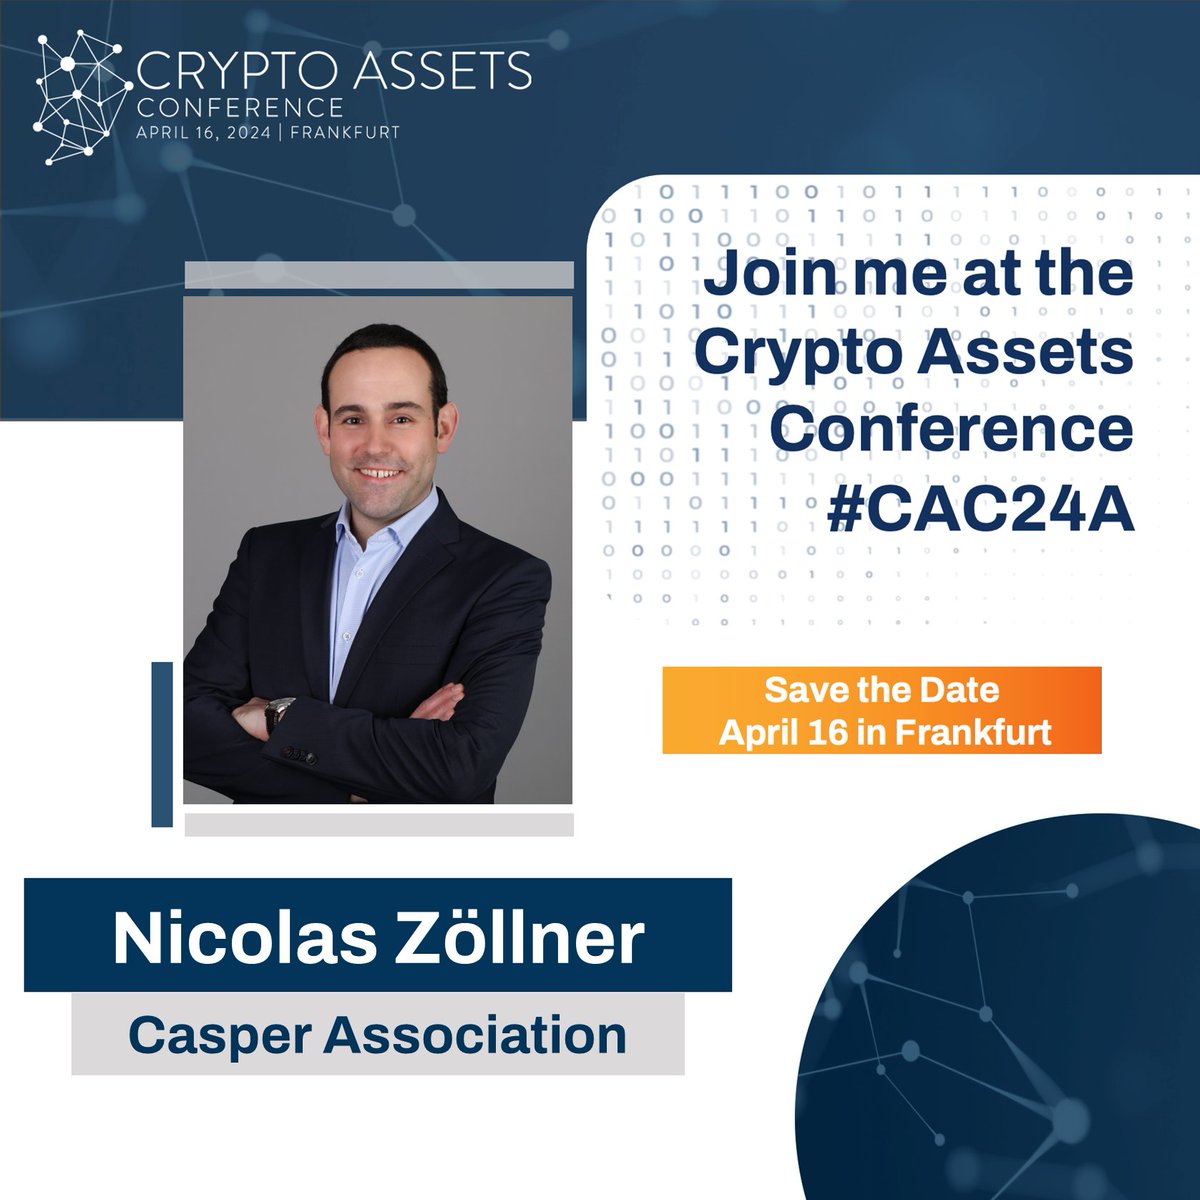 Excited for #CAC24A in Frankfurt next week! A prime opportunity to explore the latest #CryptoAssets trends & discuss the future of FinTech. Looking forward to engaging talks & inspiring encounters. 🚀

Lets connect!

#Networking #Crypto #FinTech